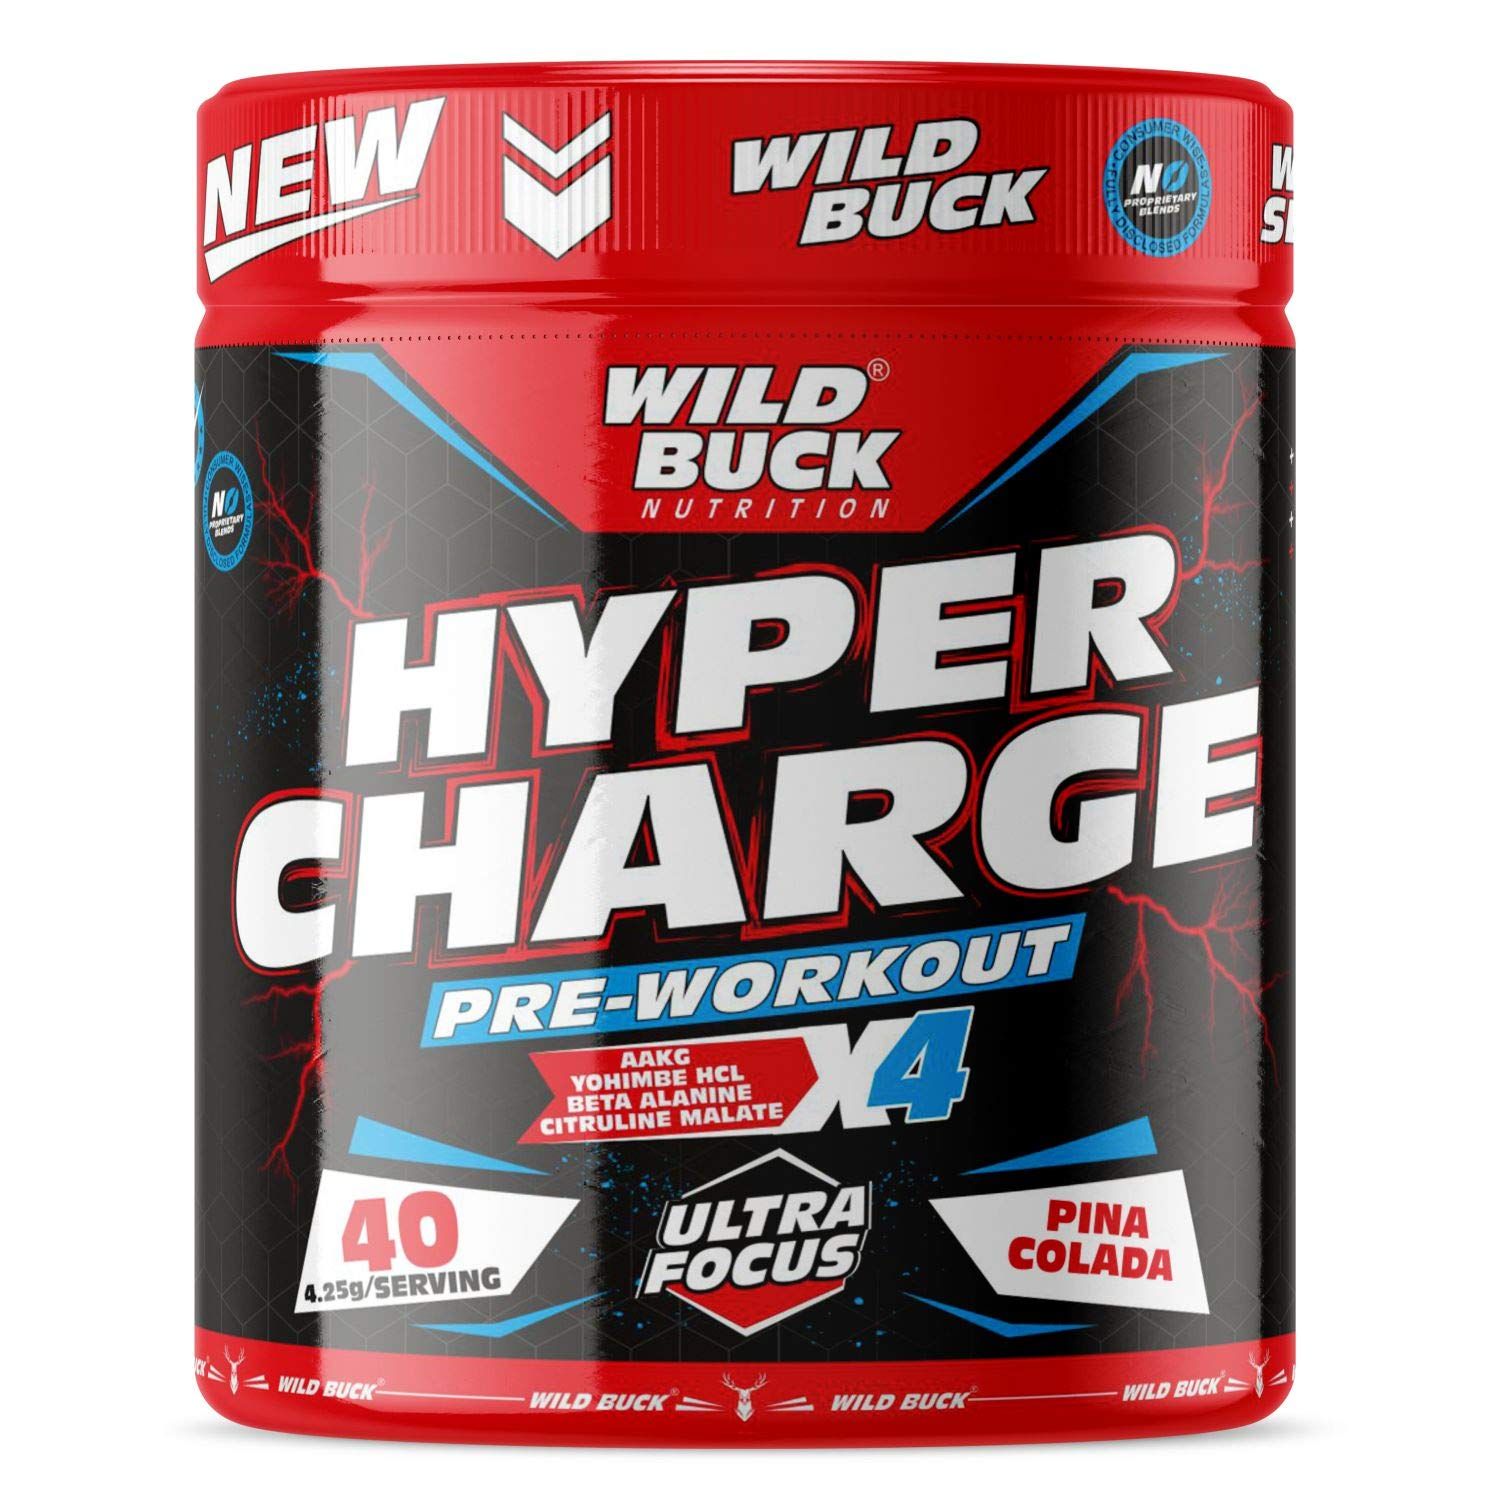 WILD BUCK Hyper Charge Pre Workout Image